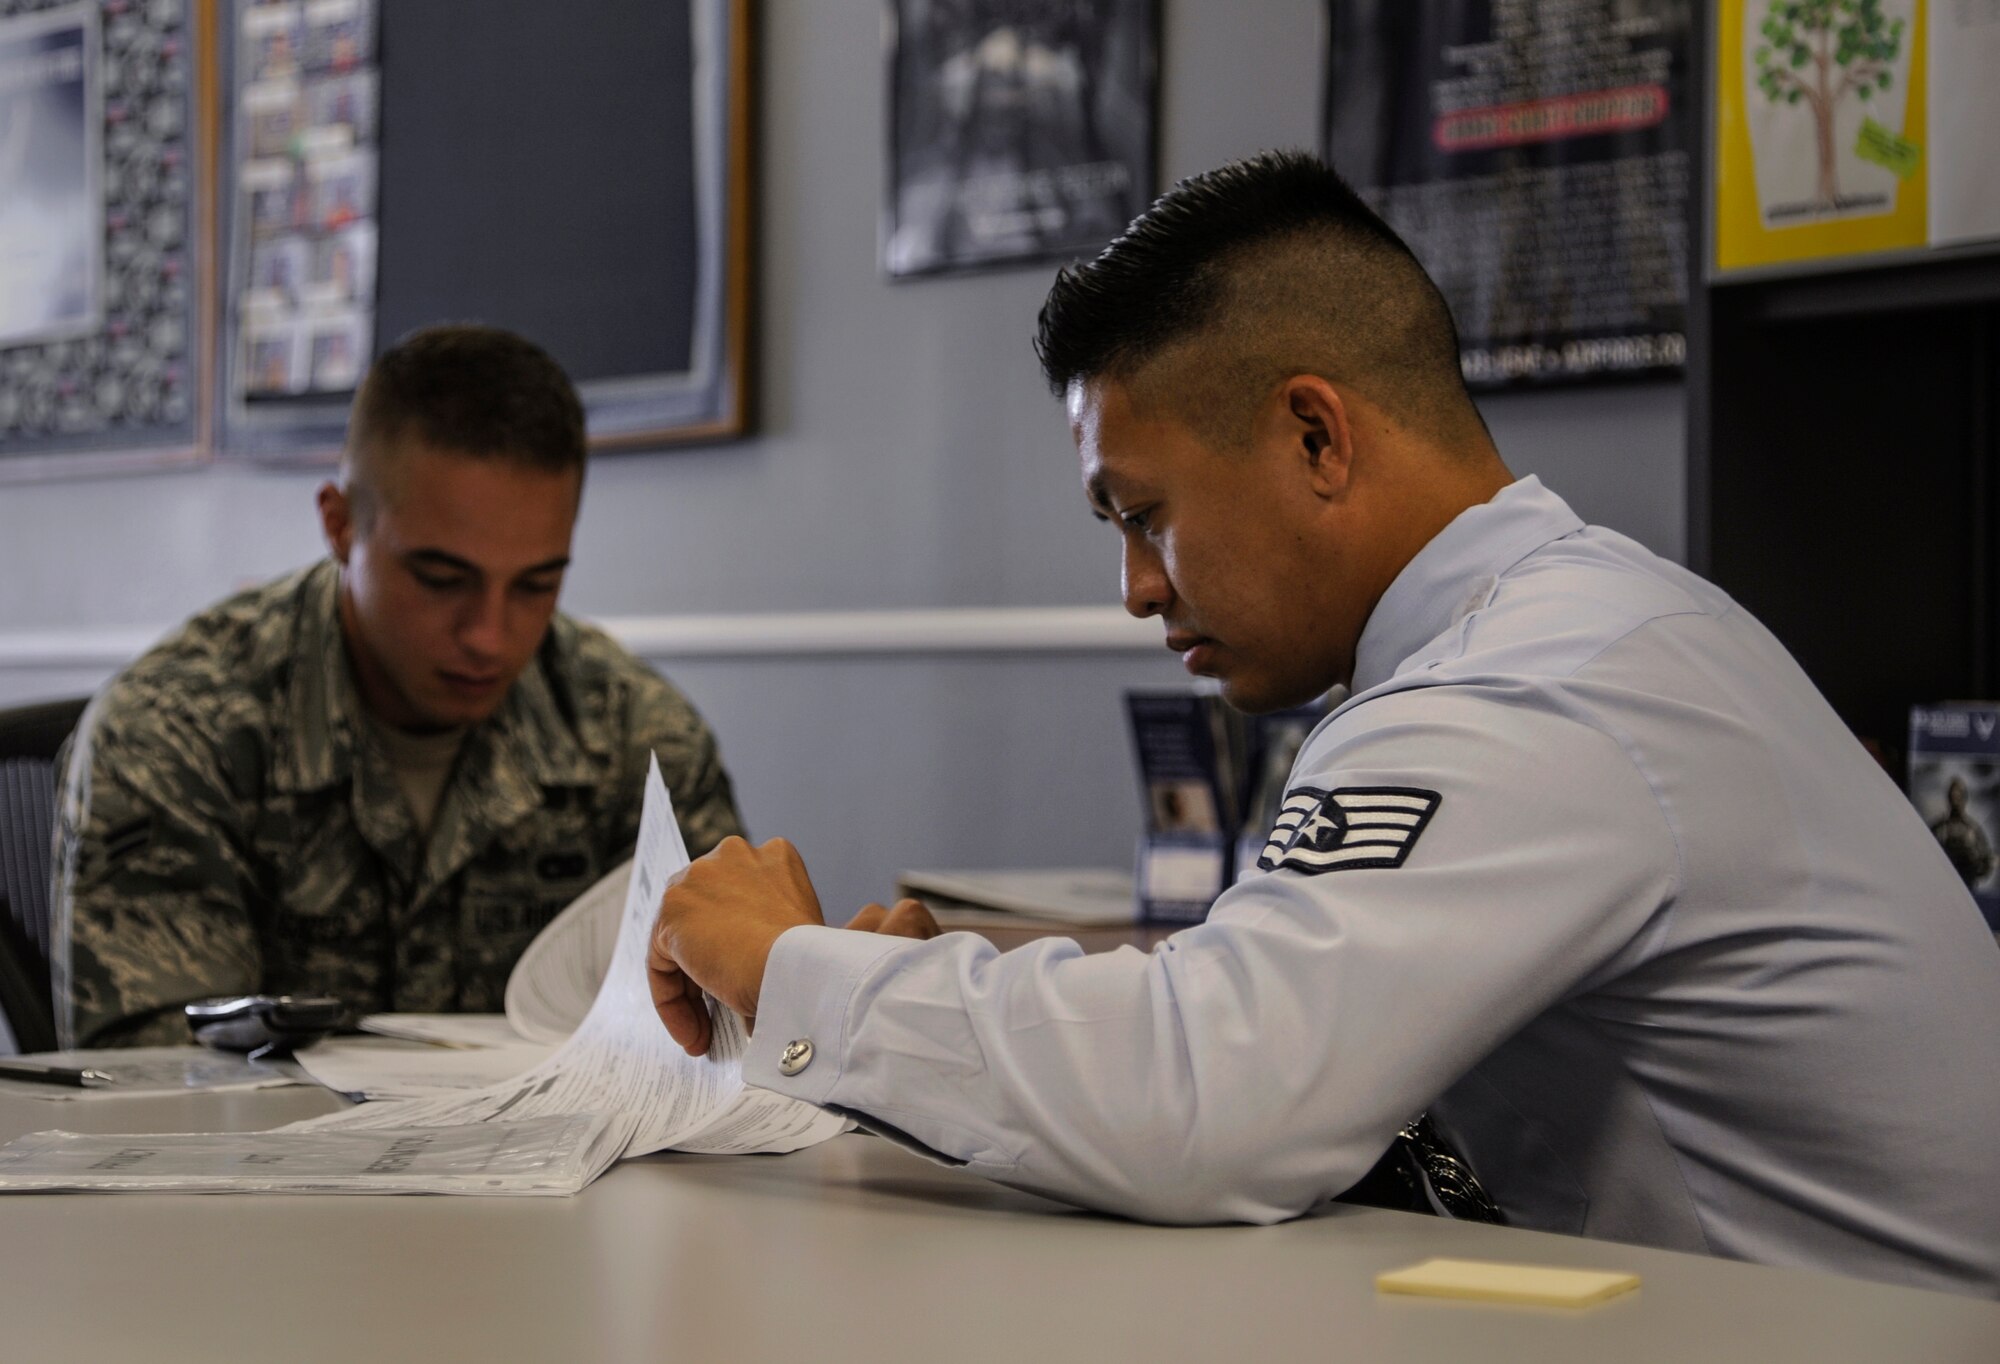 Staff Sgt. Mark Quiling, a 345th Recruiting Squadron enlisted accessions recruiter, reviews the guidelines of the Recruiter’s Assistance program with Airman 1st Class Jacob Gates, an 86th Logistics Readiness Squadron vehicle operations specialist, July 15, 2014, in Jacksonville, Ark. (U.S. Air Force photo by Airman 1st Class Harry Brexel)